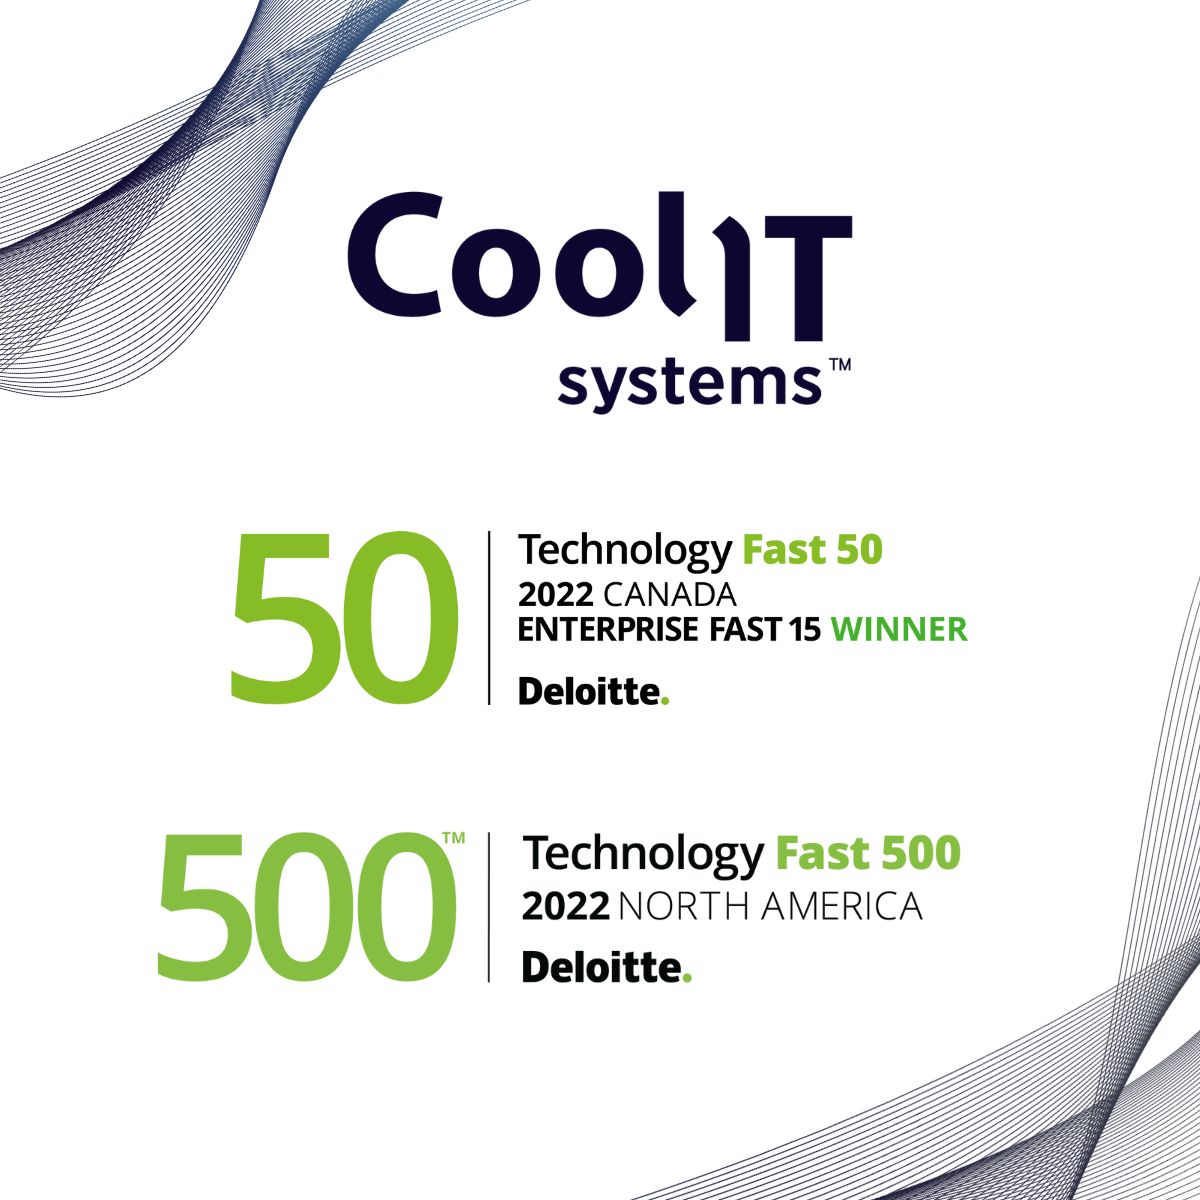 CoolIT Systems is named one of North America’s Fastest-Growing Tech Companies as part of the 2022 Deloitte Technology Fast 500™ program